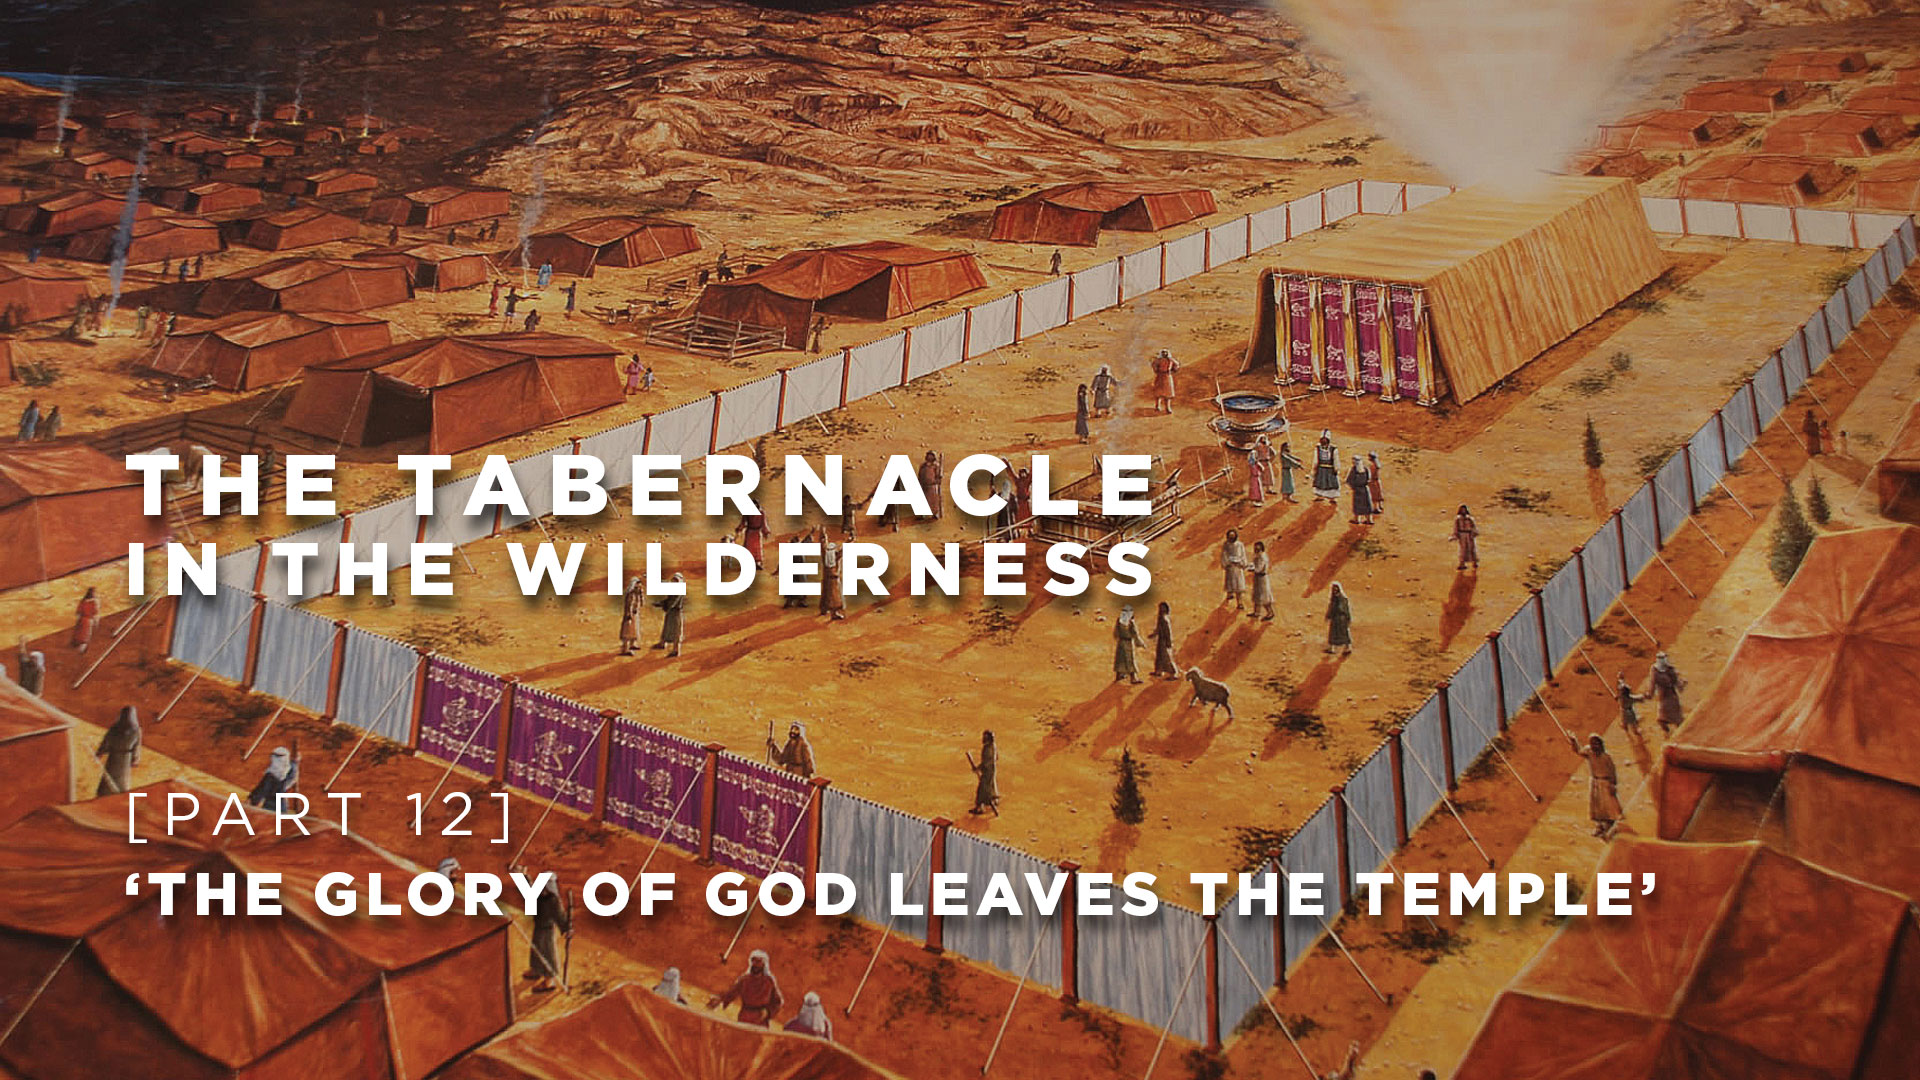 Part 12 - The Glory Of God Leaves The Temple (Part 3)